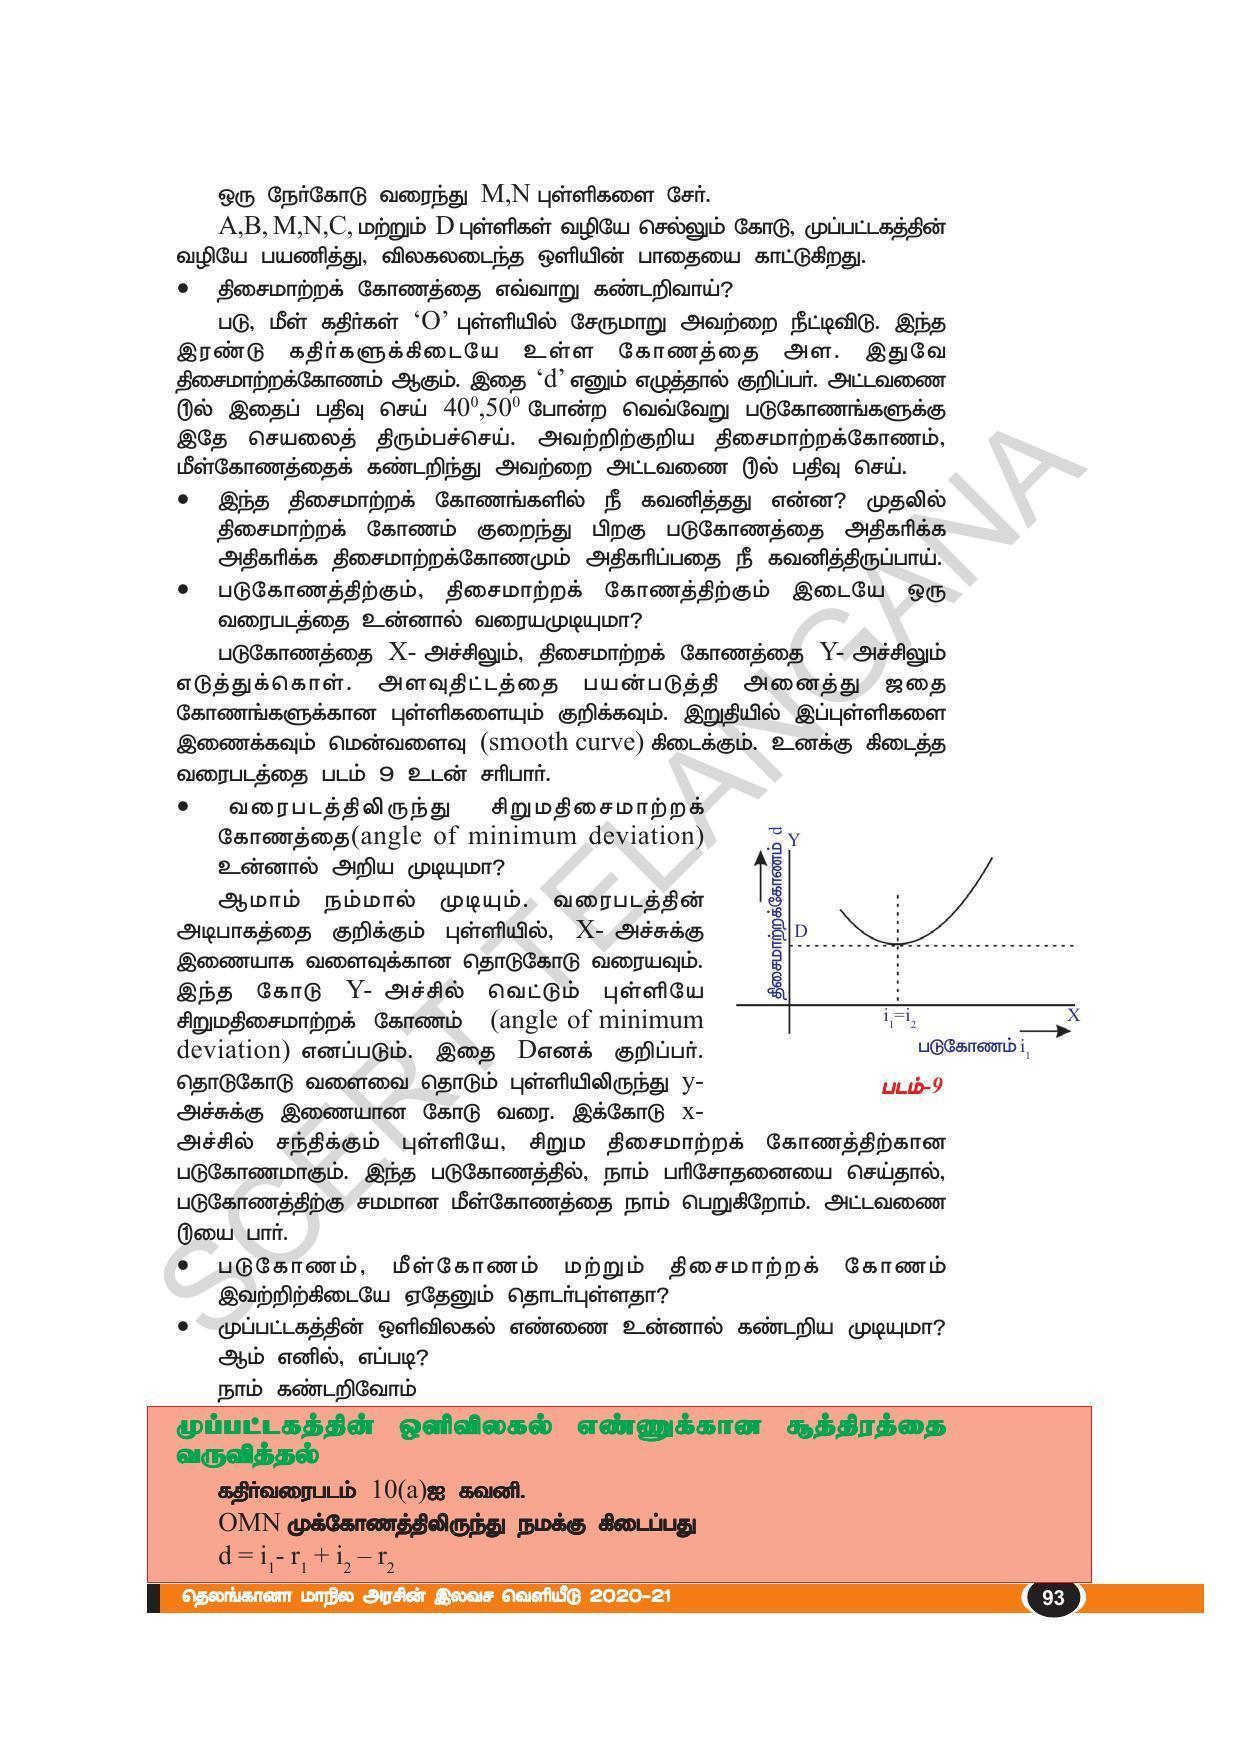 TS SCERT Class 10 Physical Science(Tamil Medium) Text Book - Page 105